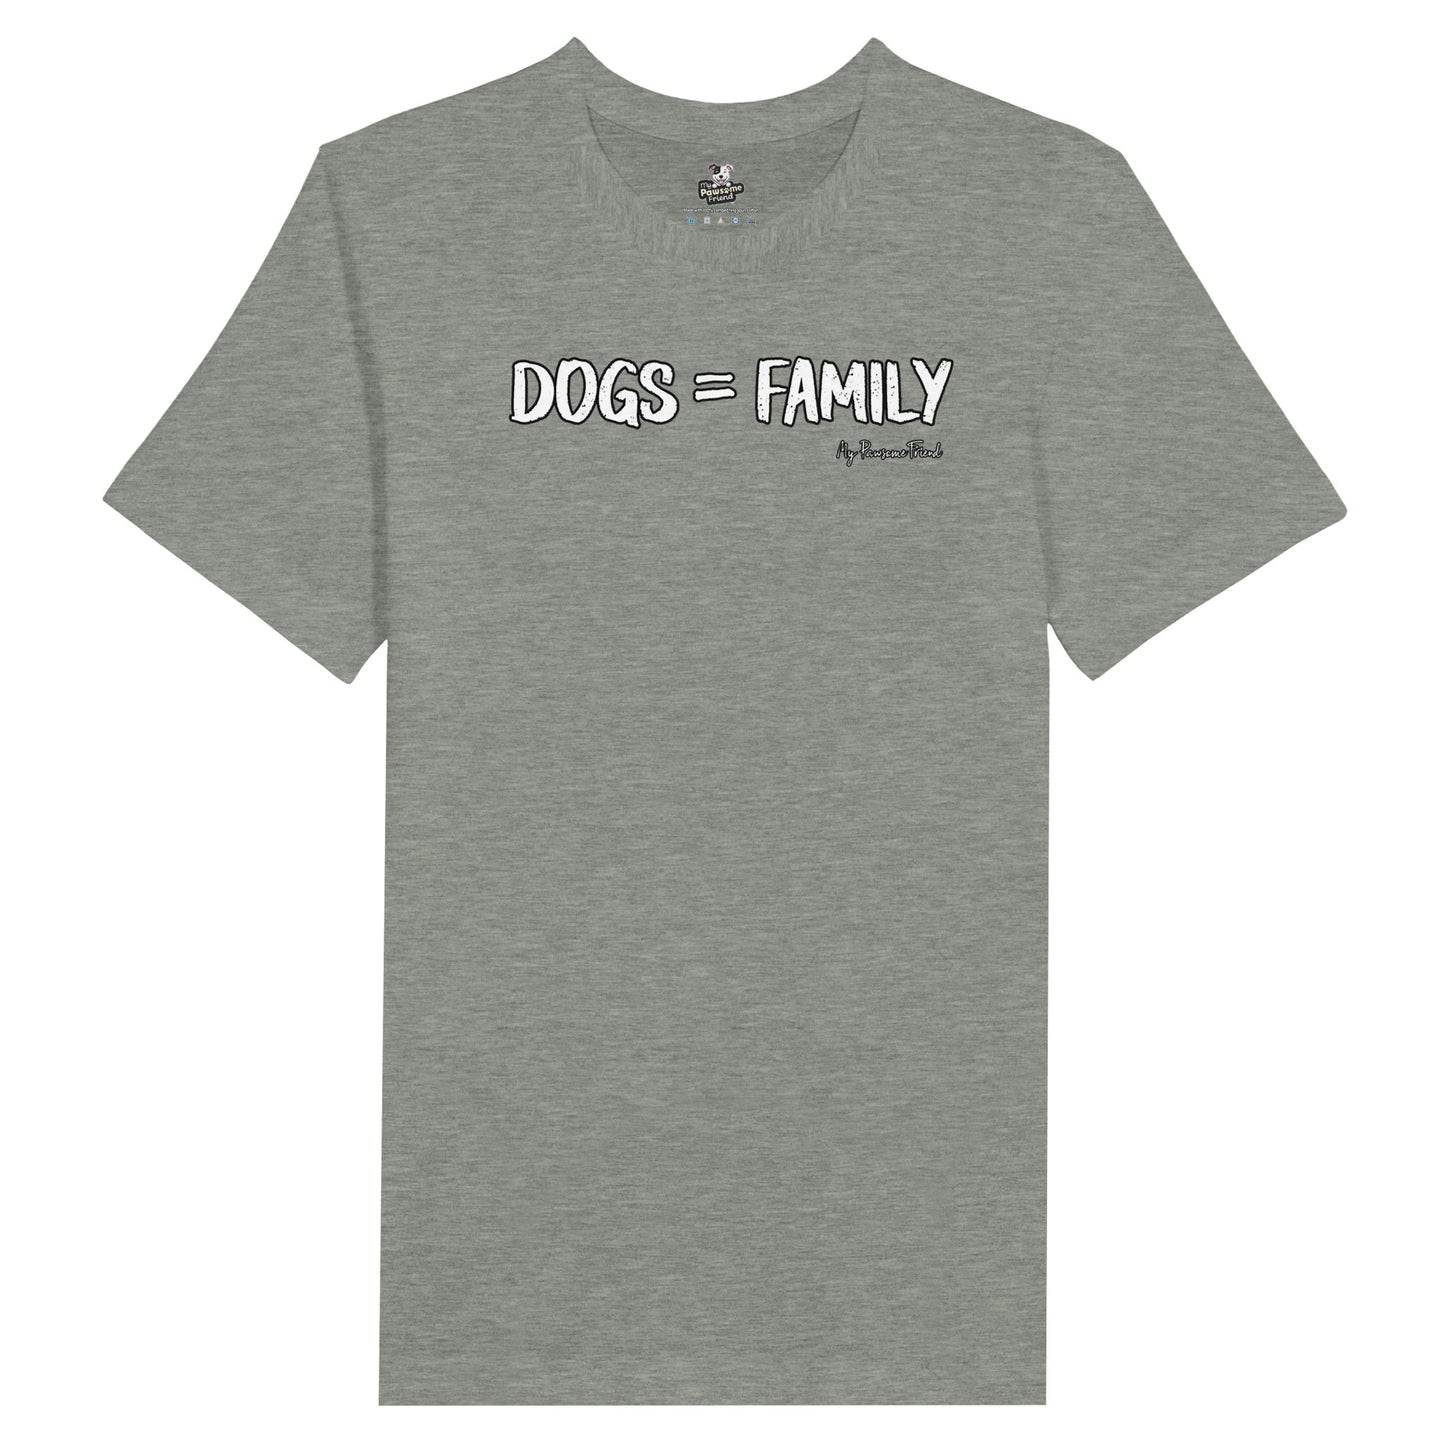 Unisex T-shirt with the message "Dogs = Family". The color of the unisex t-shirt is grey